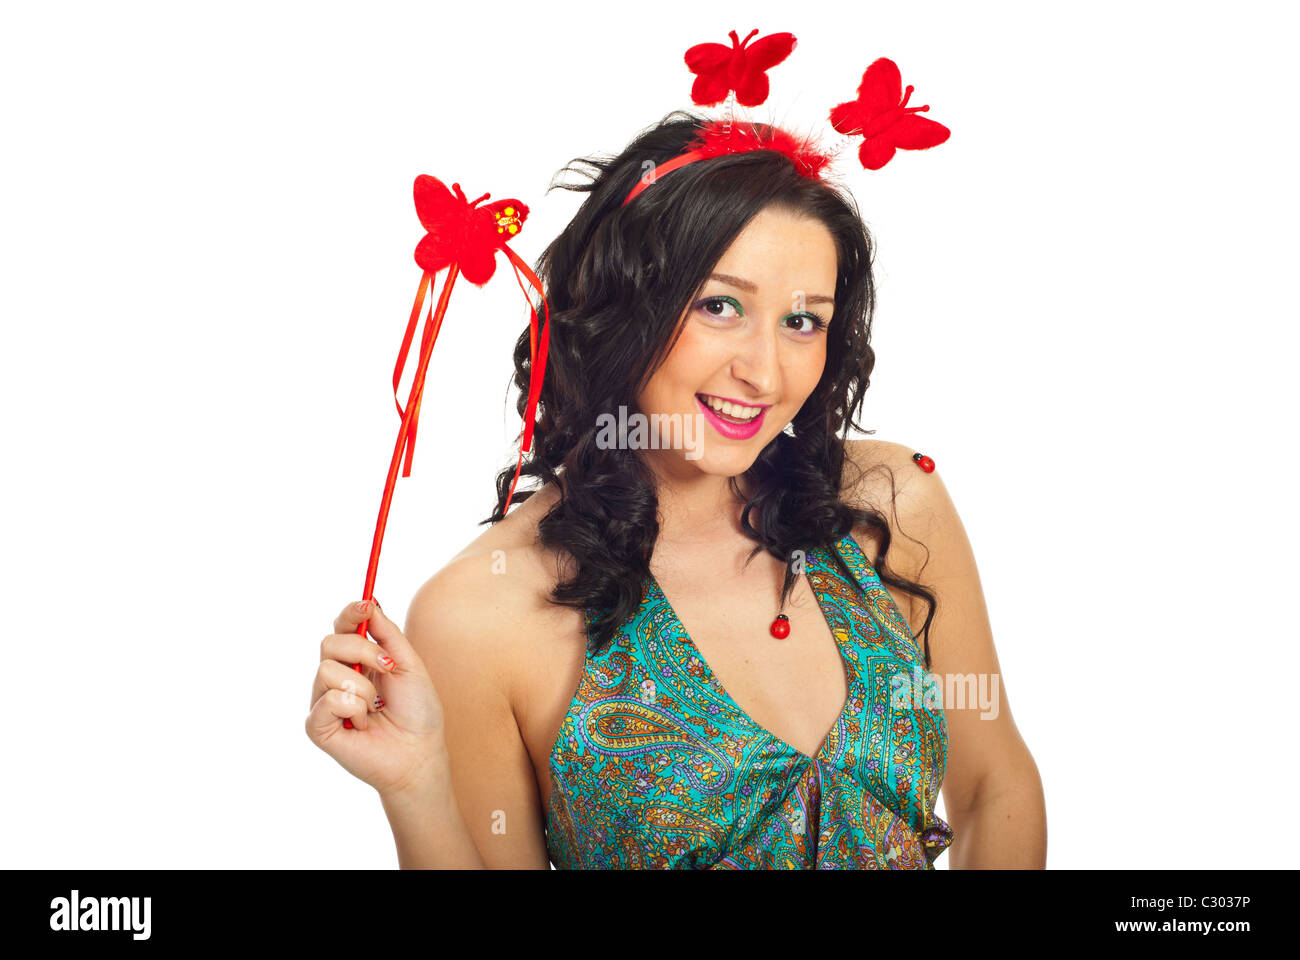 Happy spring woman holding butterfly wand isolated on white background Stock Photo